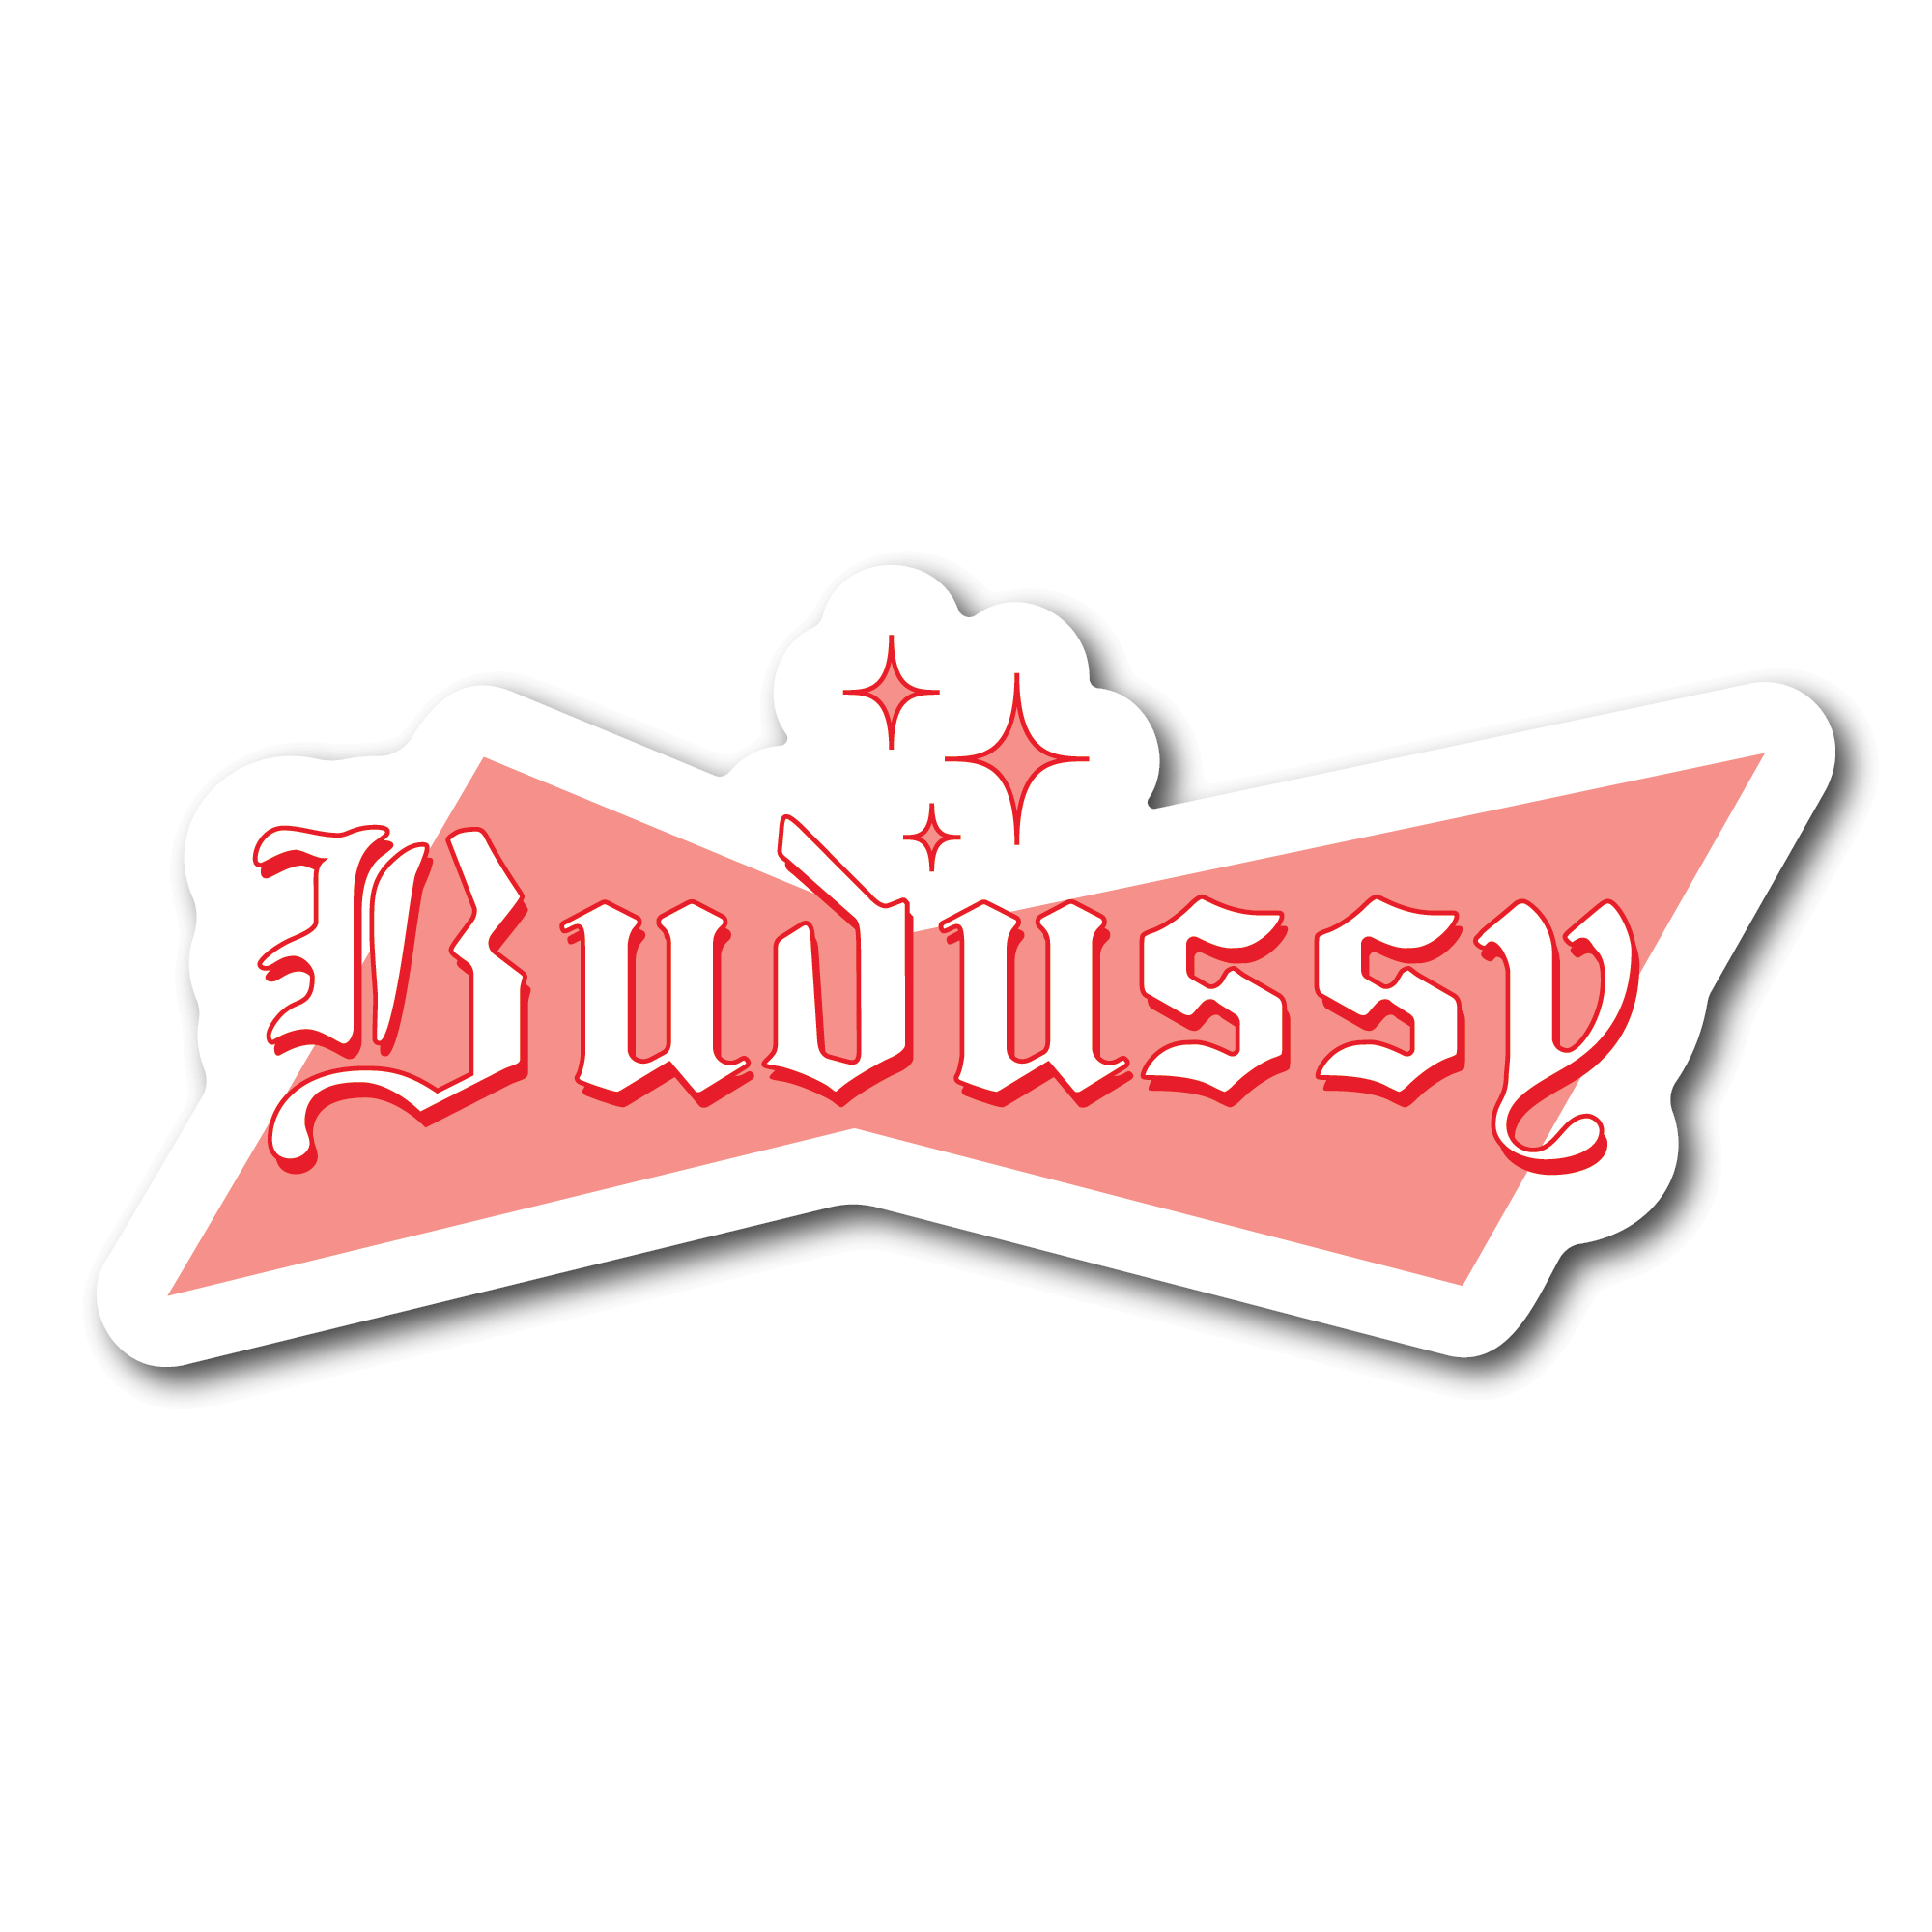 Small Sticker that says budussy in a red gothic font with sparkles over it